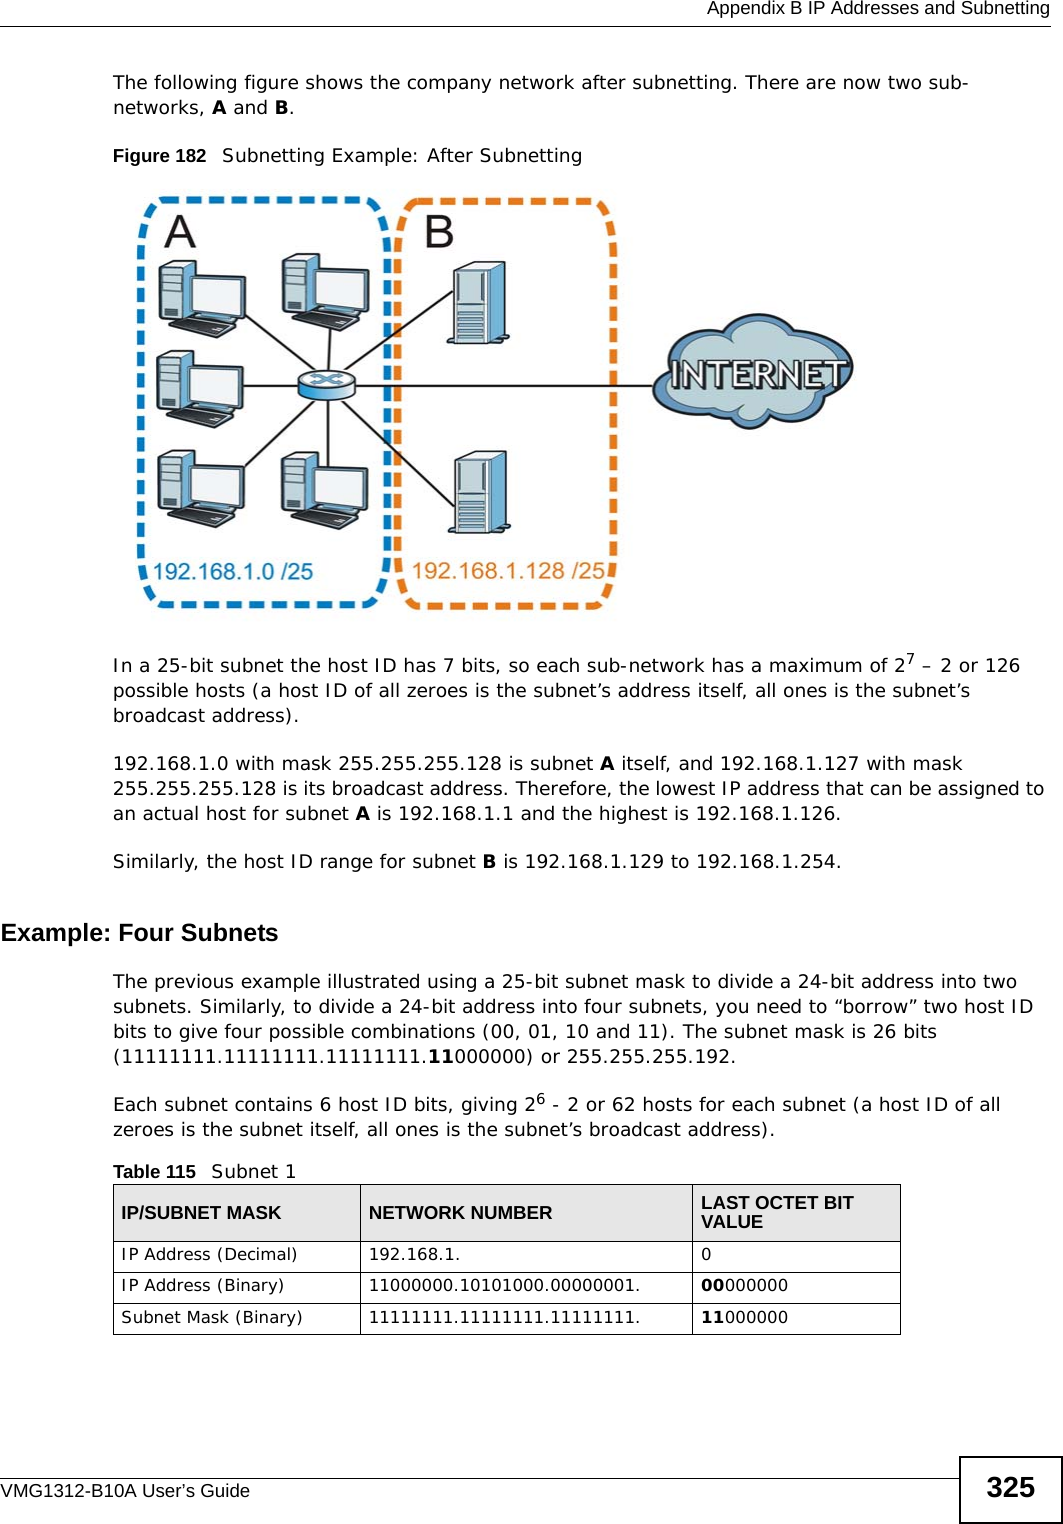  Appendix B IP Addresses and SubnettingVMG1312-B10A User’s Guide 325The following figure shows the company network after subnetting. There are now two sub-networks, A and B. Figure 182   Subnetting Example: After SubnettingIn a 25-bit subnet the host ID has 7 bits, so each sub-network has a maximum of 27 – 2 or 126 possible hosts (a host ID of all zeroes is the subnet’s address itself, all ones is the subnet’s broadcast address).192.168.1.0 with mask 255.255.255.128 is subnet A itself, and 192.168.1.127 with mask 255.255.255.128 is its broadcast address. Therefore, the lowest IP address that can be assigned to an actual host for subnet A is 192.168.1.1 and the highest is 192.168.1.126. Similarly, the host ID range for subnet B is 192.168.1.129 to 192.168.1.254.Example: Four Subnets The previous example illustrated using a 25-bit subnet mask to divide a 24-bit address into two subnets. Similarly, to divide a 24-bit address into four subnets, you need to “borrow” two host ID bits to give four possible combinations (00, 01, 10 and 11). The subnet mask is 26 bits (11111111.11111111.11111111.11000000) or 255.255.255.192. Each subnet contains 6 host ID bits, giving 26 - 2 or 62 hosts for each subnet (a host ID of all zeroes is the subnet itself, all ones is the subnet’s broadcast address). Table 115   Subnet 1IP/SUBNET MASK NETWORK NUMBER LAST OCTET BIT VALUEIP Address (Decimal) 192.168.1. 0IP Address (Binary) 11000000.10101000.00000001. 00000000Subnet Mask (Binary) 11111111.11111111.11111111. 11000000